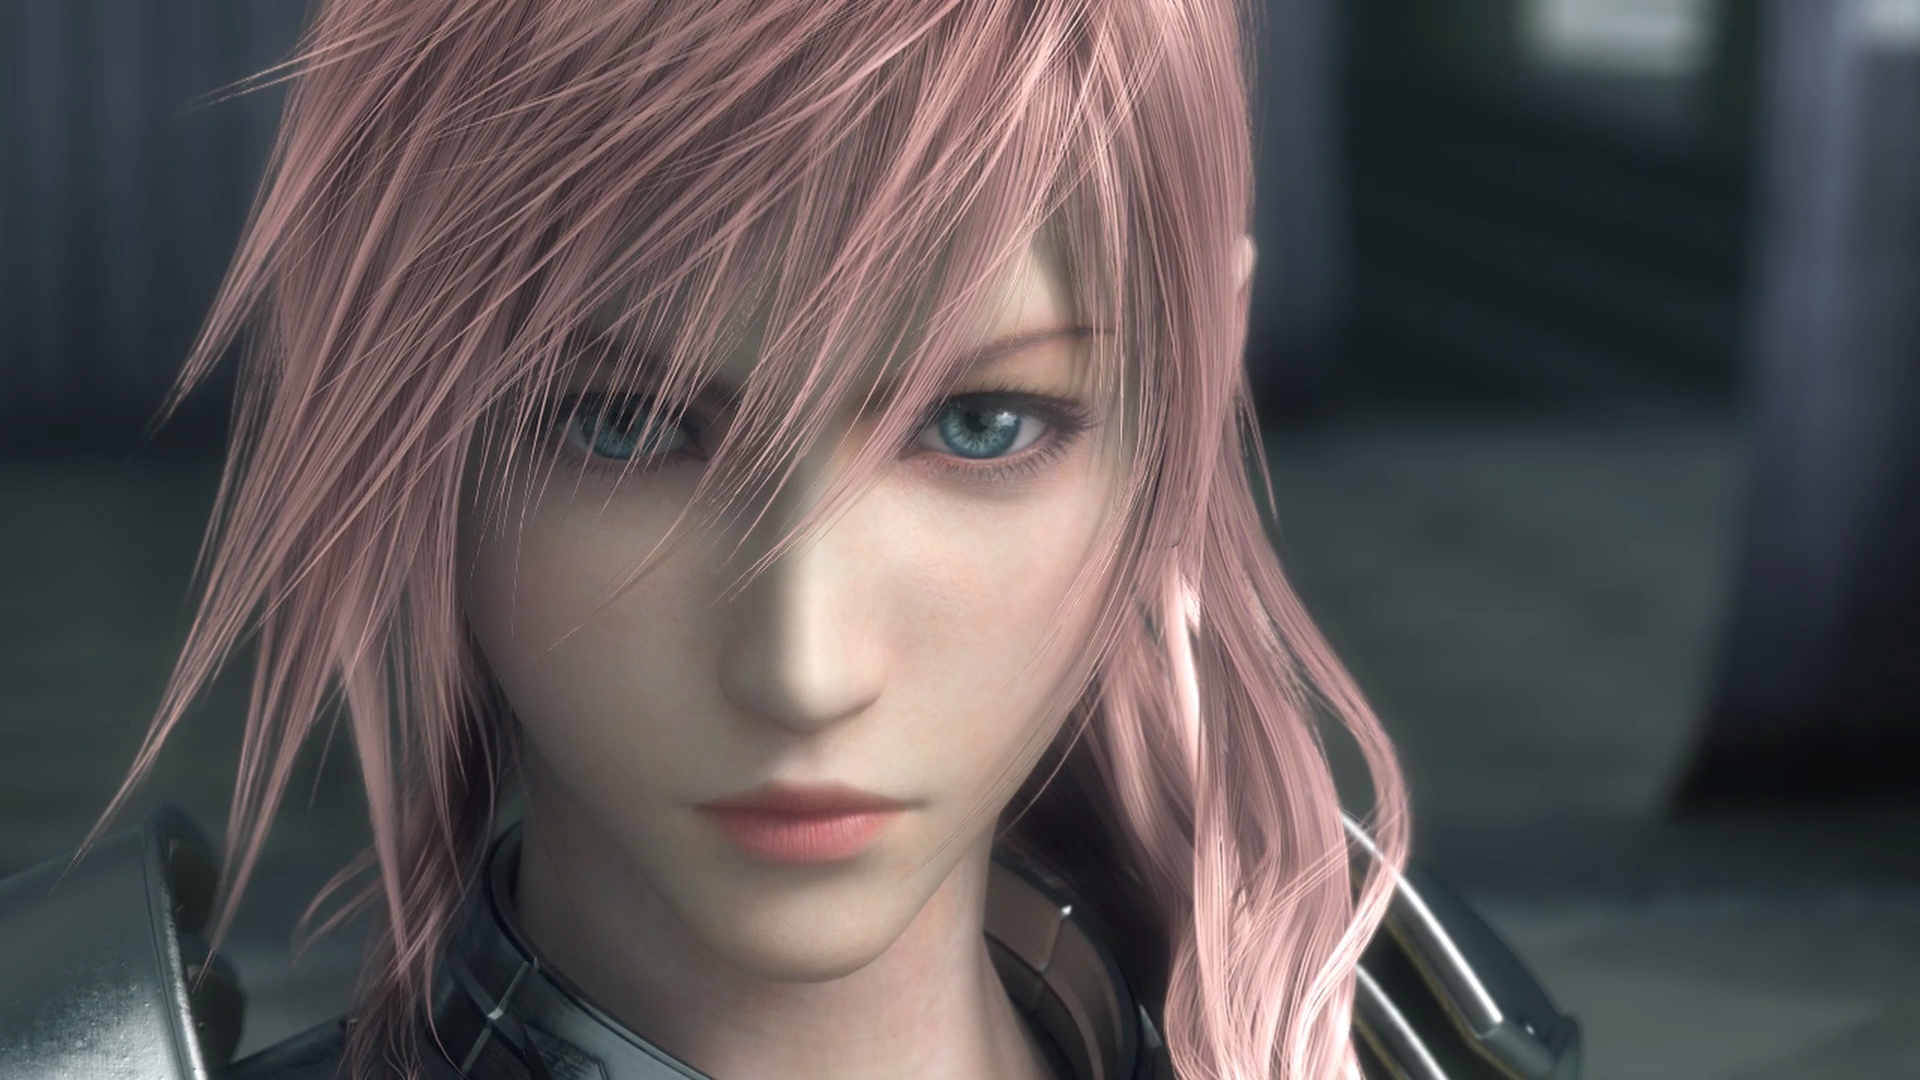 Final Fantasy XIII 2 Wallpapers Free Downloads InMotion Gaming